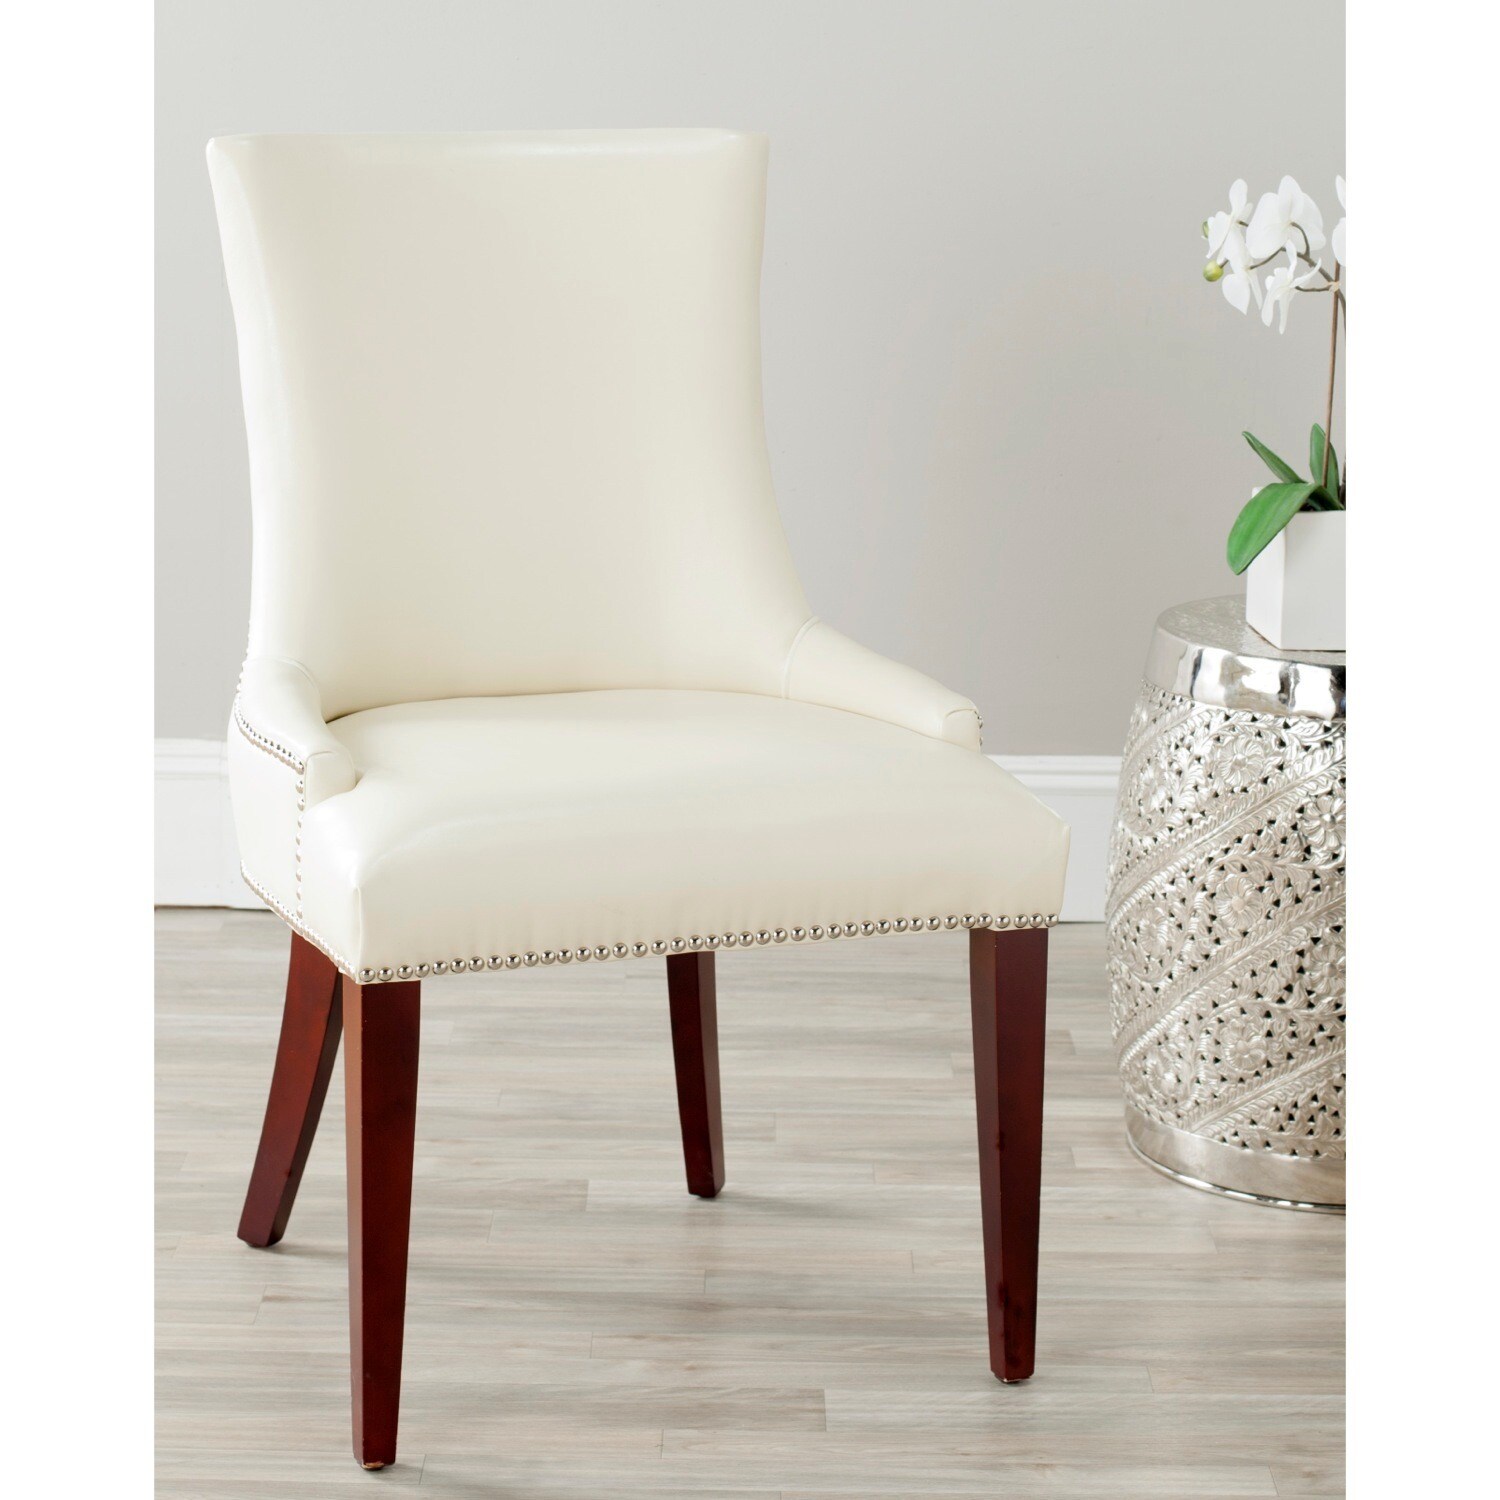 Safavieh Becca Cream Leather Dining Chair - Overstock™ Shopping - Great